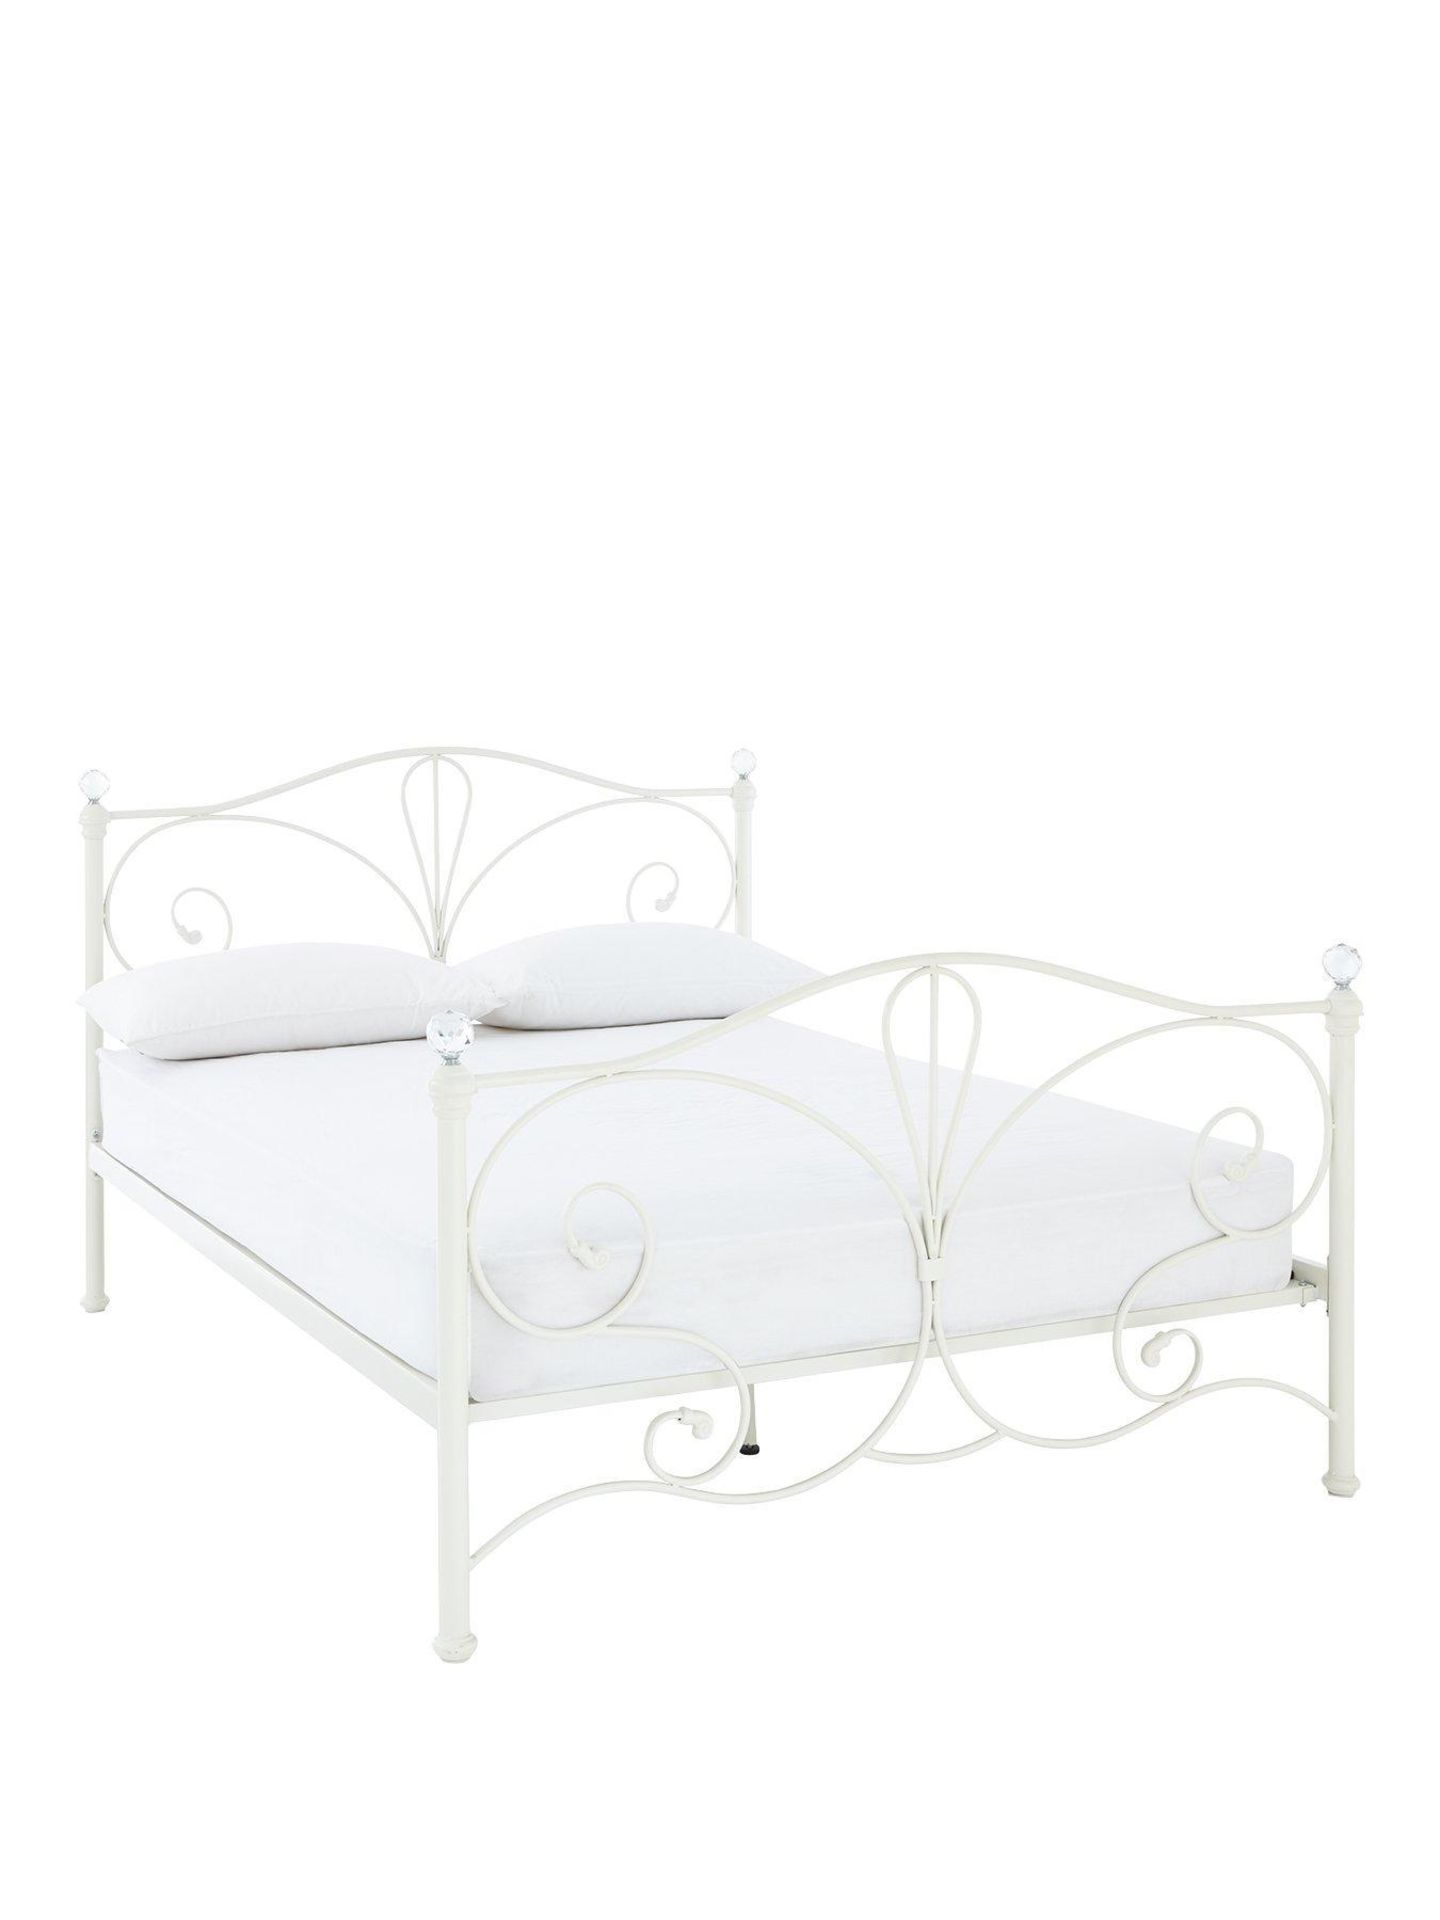 Boxed Item Claremont Small Double Bed [Ivory] 109X132X204Cm Rrp:£294.0